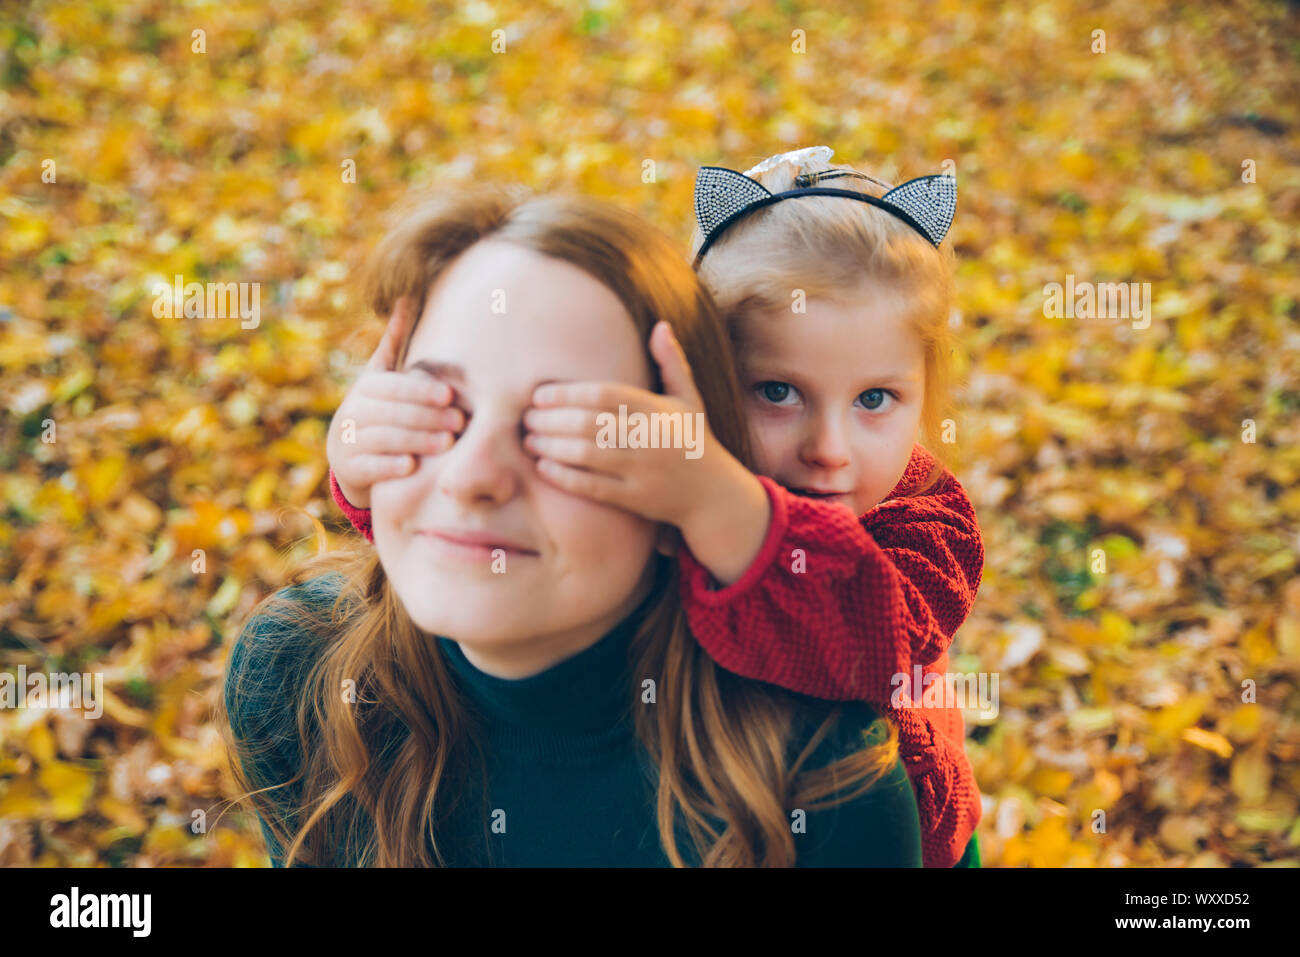 guess who daughter close eyes to mother Stock Photo